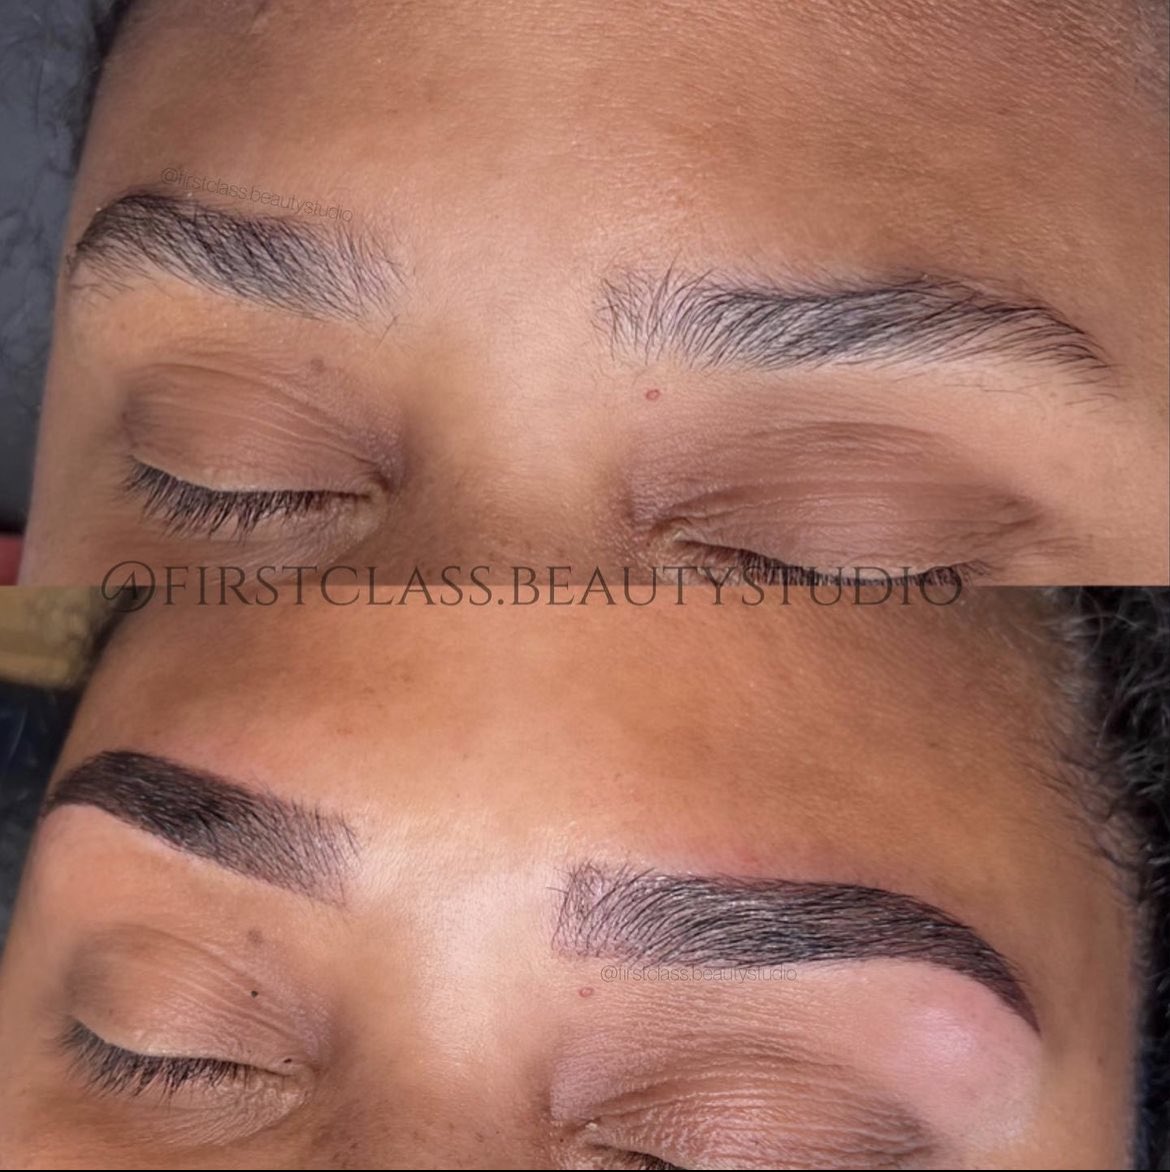 Ombrè brows before and after✨ 
📍Vaughan, On
DM on instagram to book! 
-
-
-
-
#ombre #ombrebrows #brows #microblading #eyebrows #pmu #makeup #ombrebrows #beforeandafter #beauty #permanentbrows #permanentmakeup #permanentmakeupartist #Toronto #vaughan